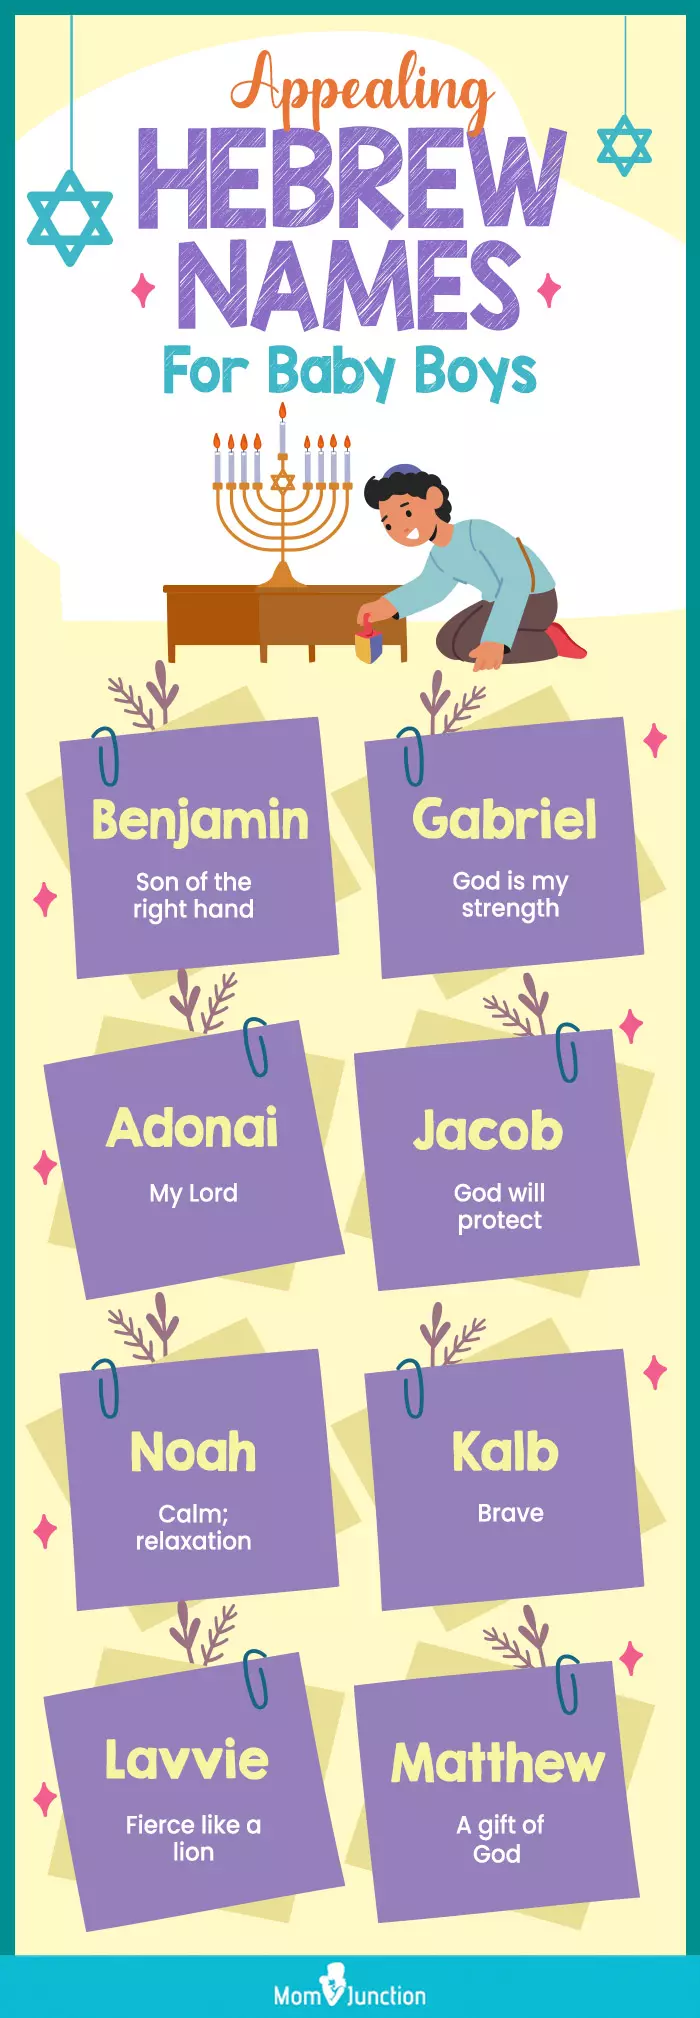 appealing hebrew names names for baby boys (infographic)